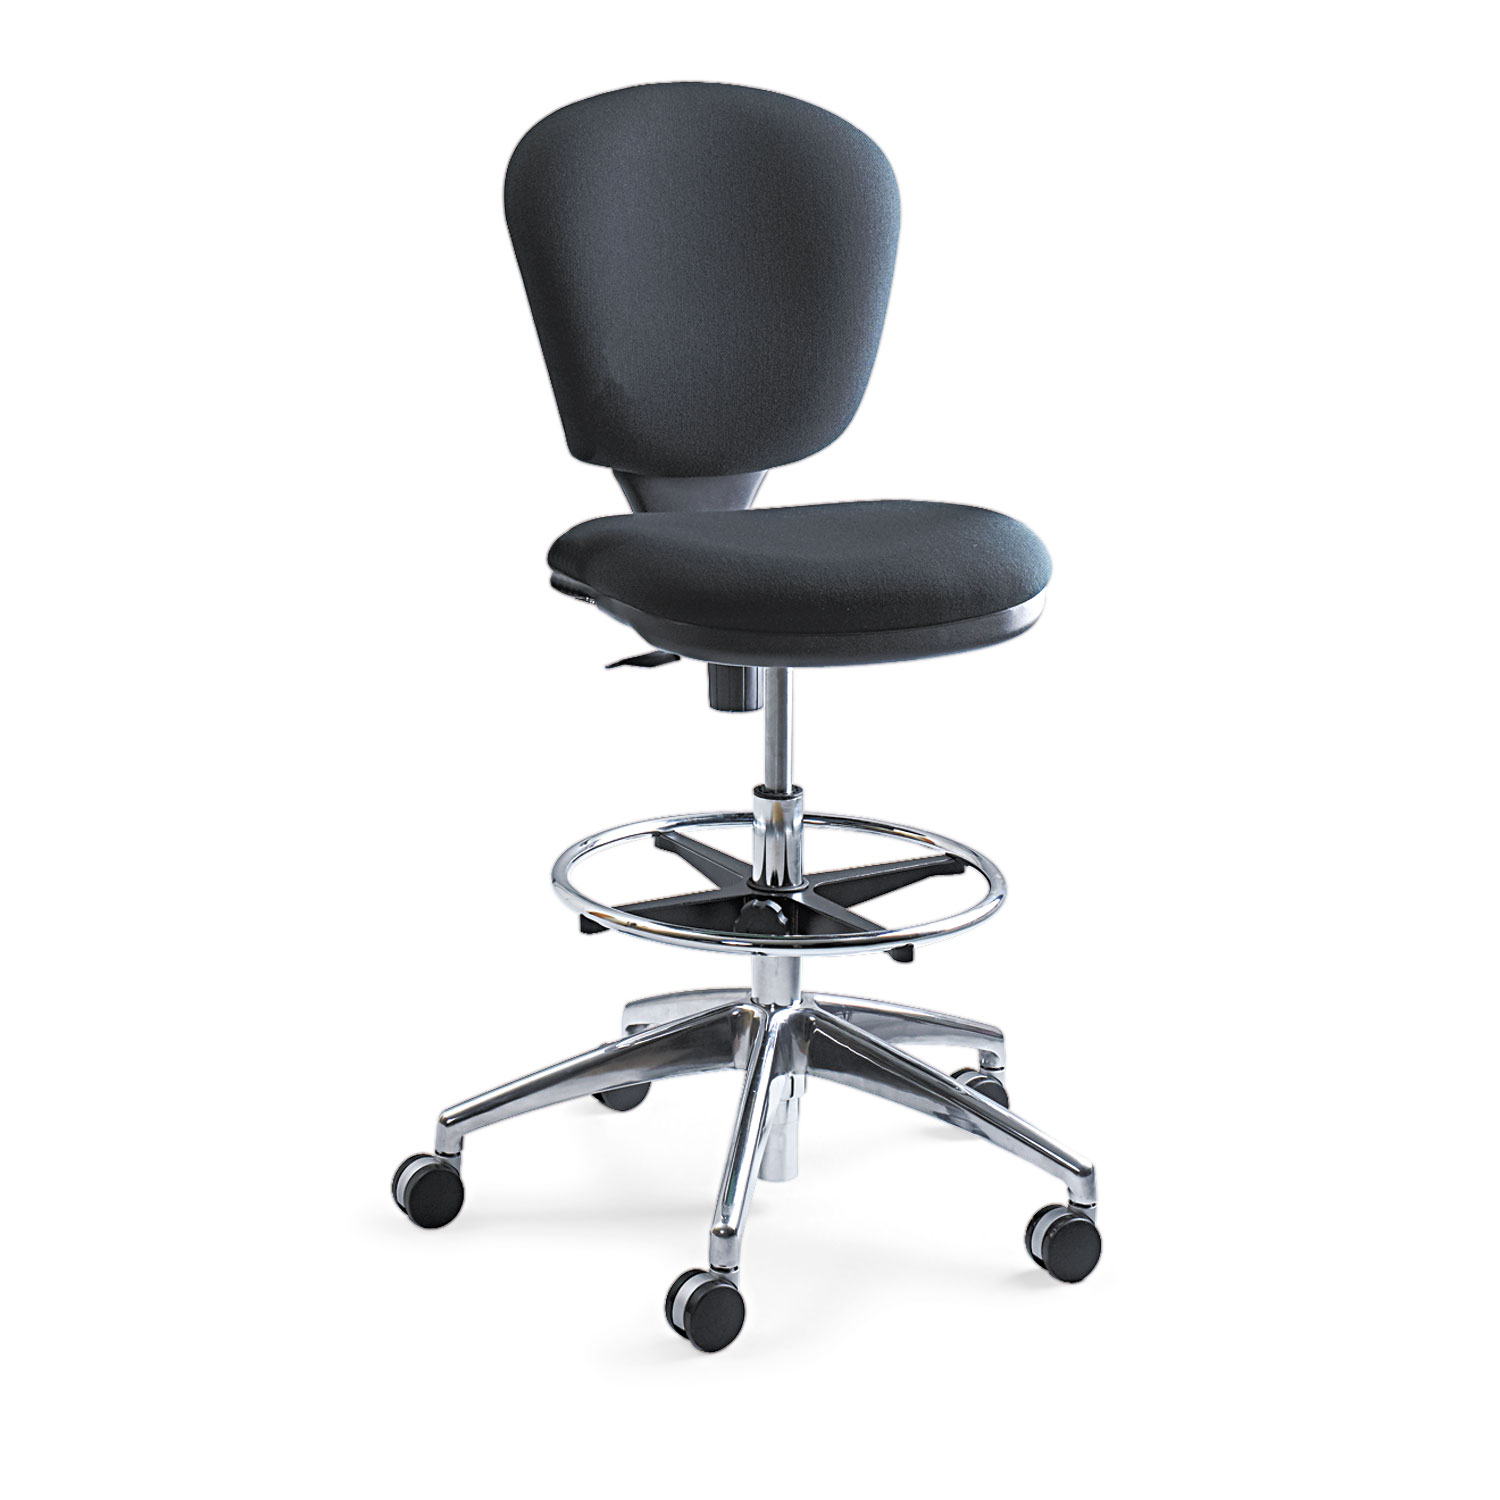  Safco 3442BL Metro Collection Extended-Height Chair, Supports up to 250 lbs., Black Seat/Black Back, Chrome Base (SAF3442BL) 